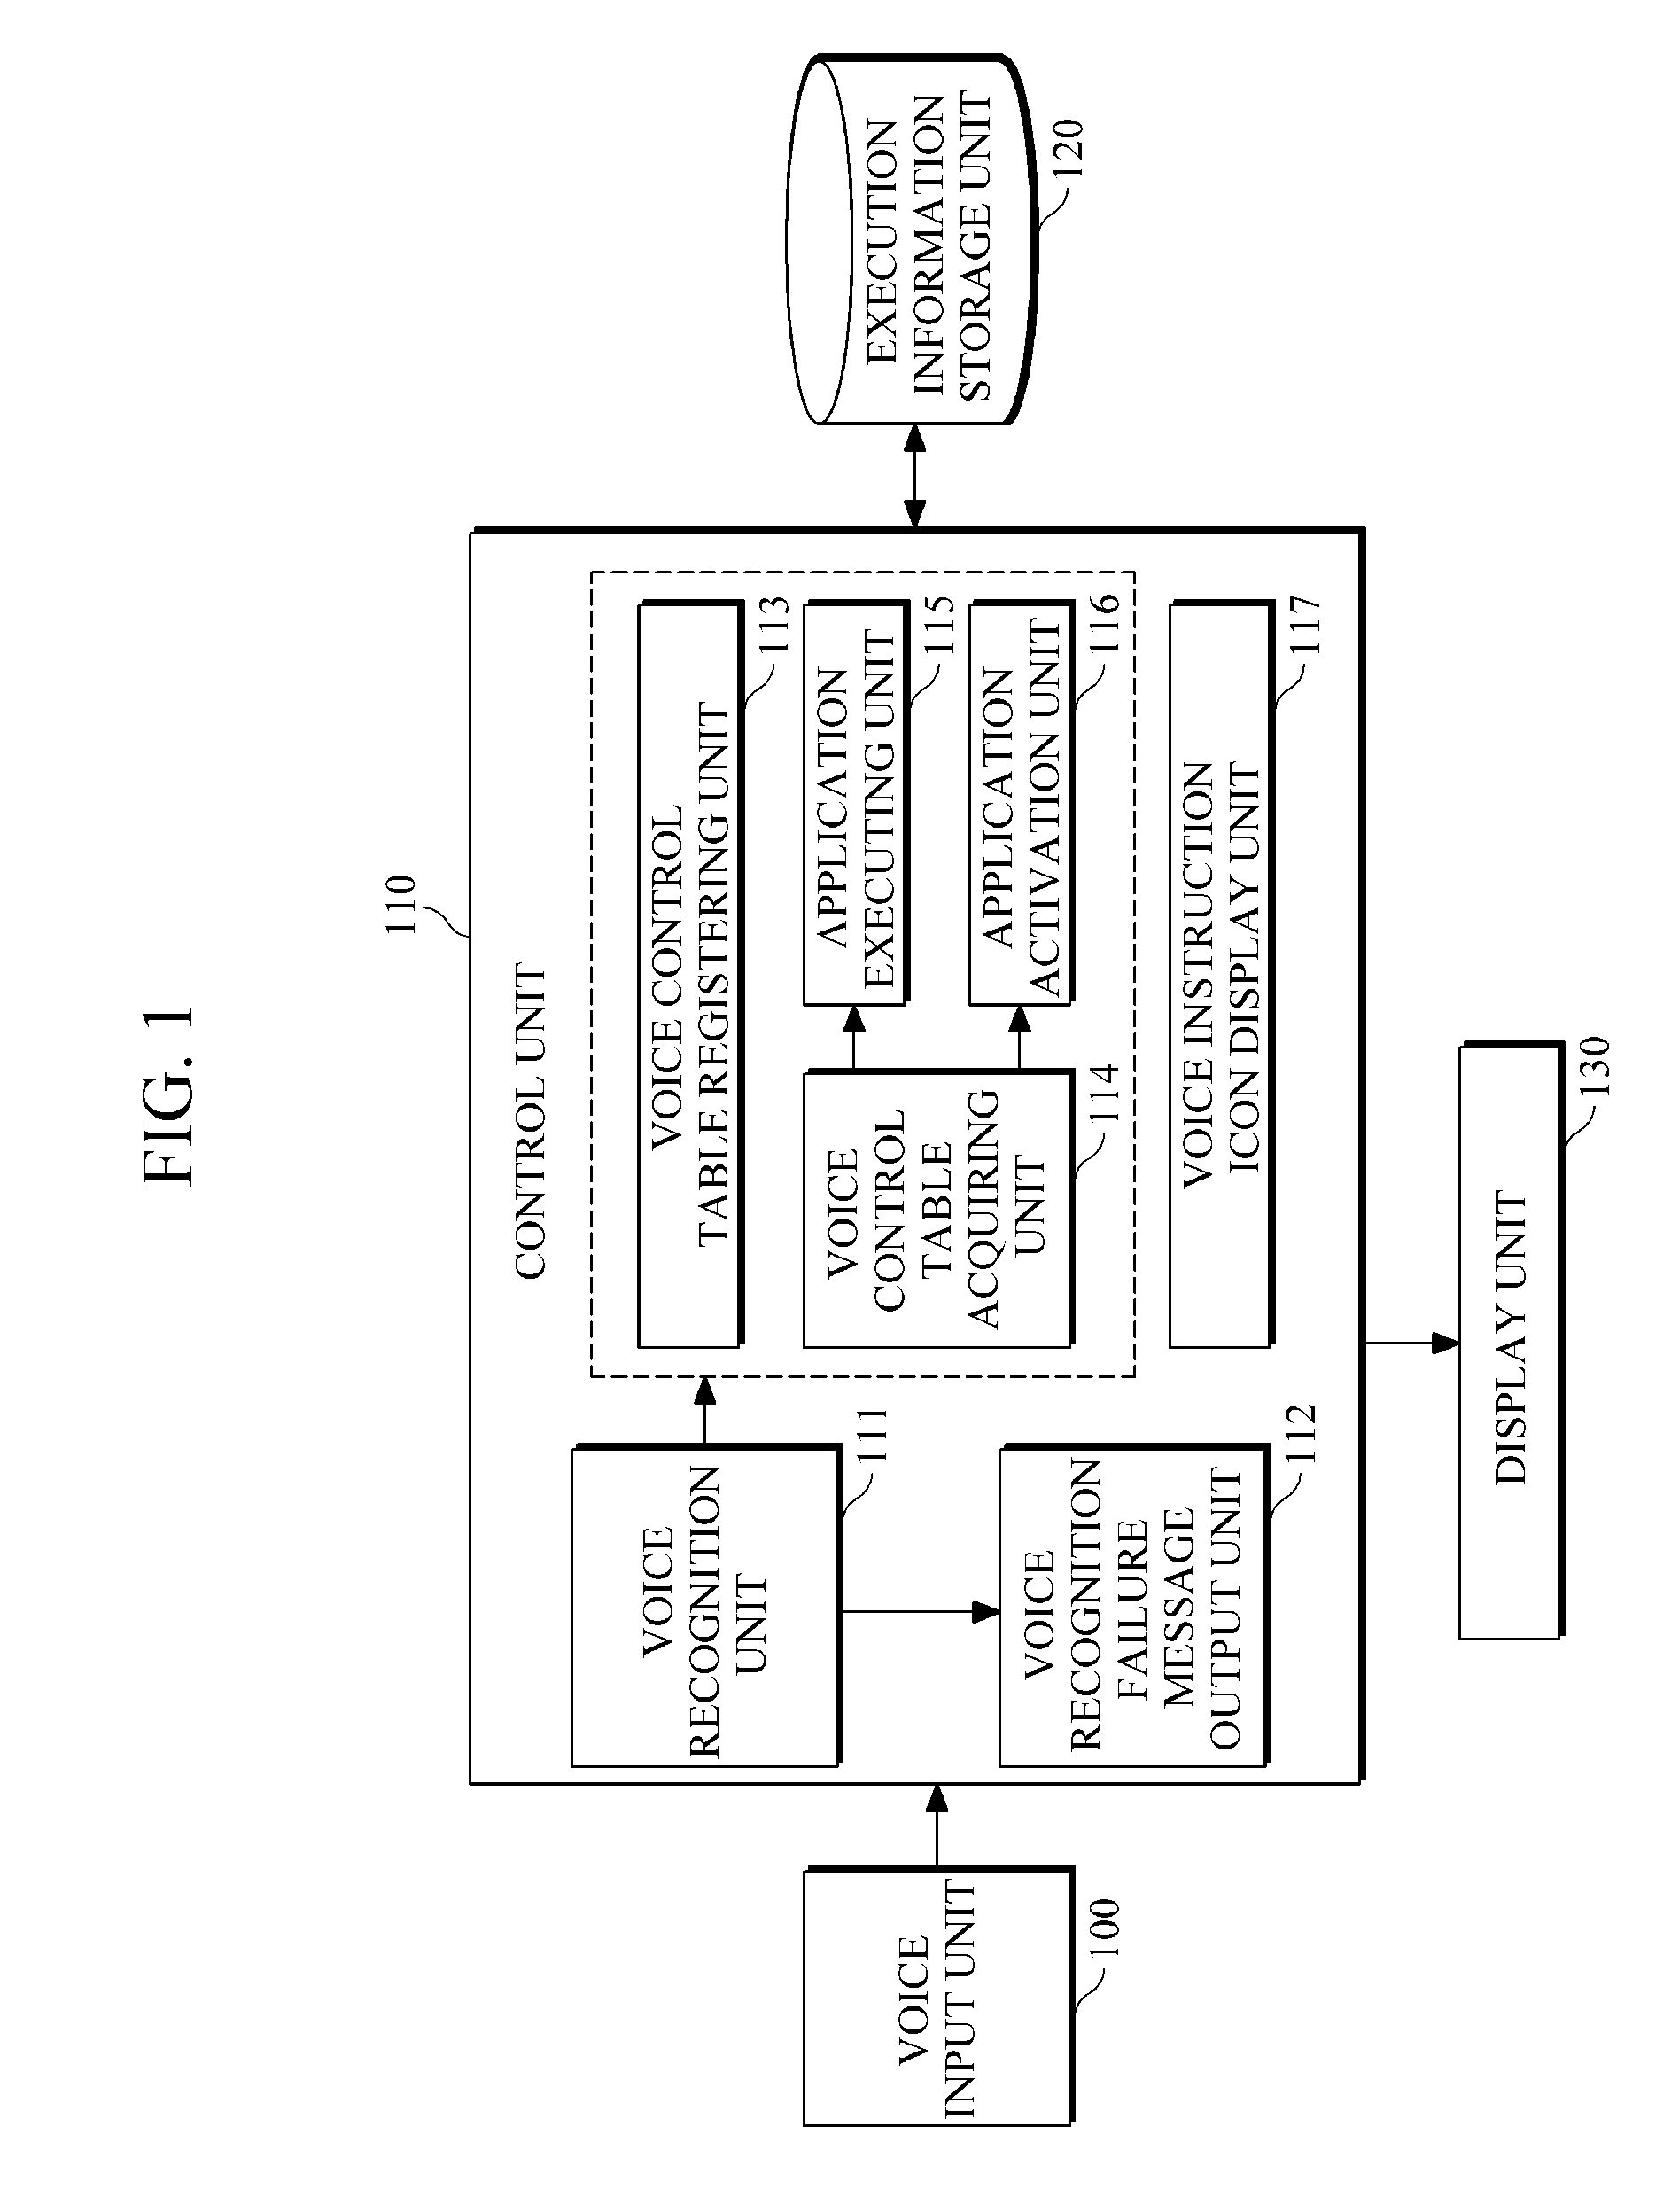 Mobile communication terminal apparatus and method for executing application through voice recognition